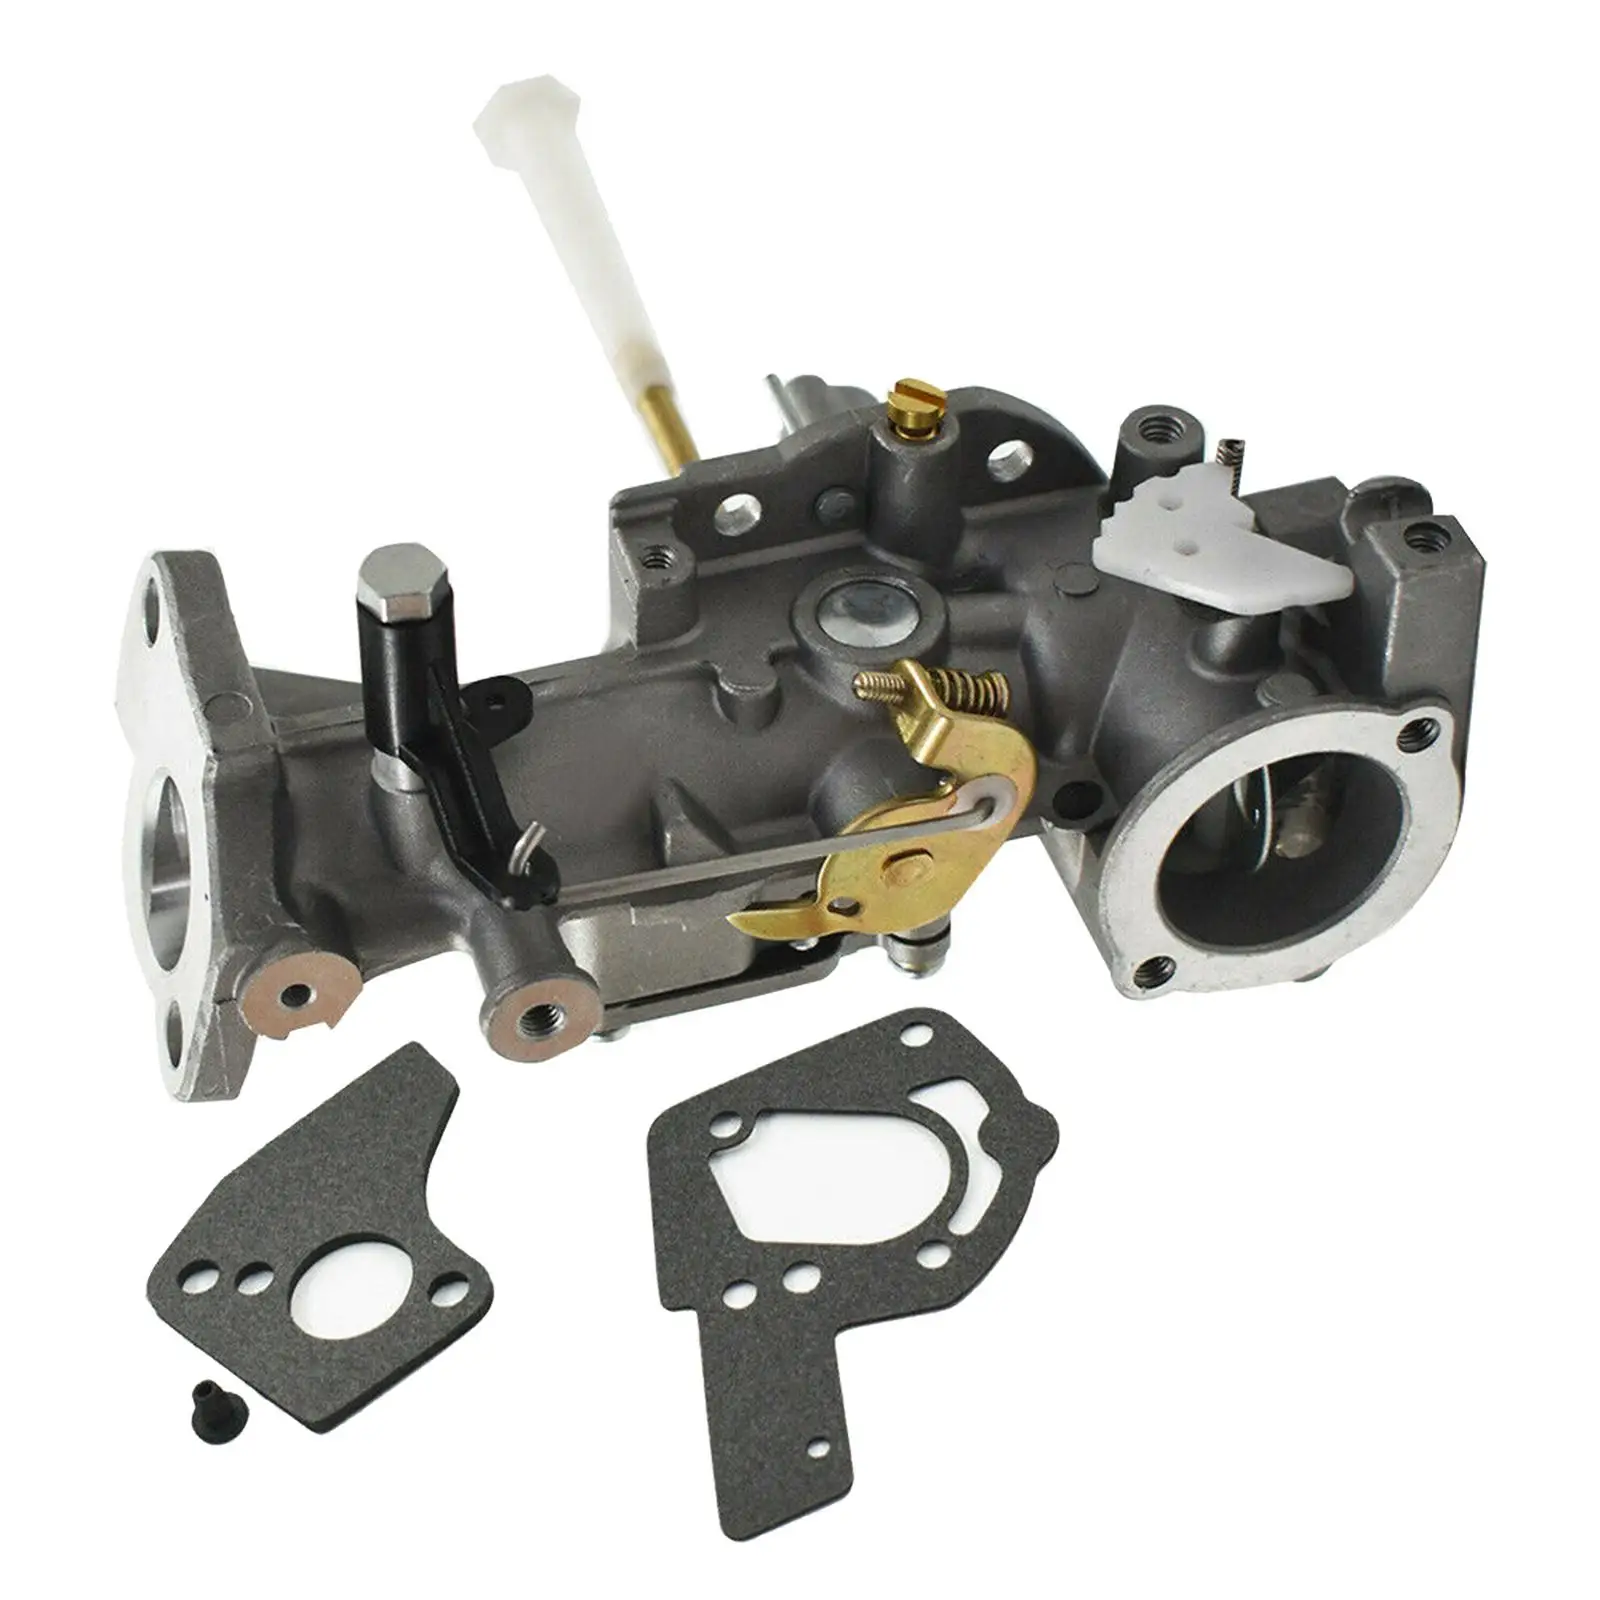 Carburetor with 2 Gaskets  130202 112202 112232 1332Hp  Part Accessories